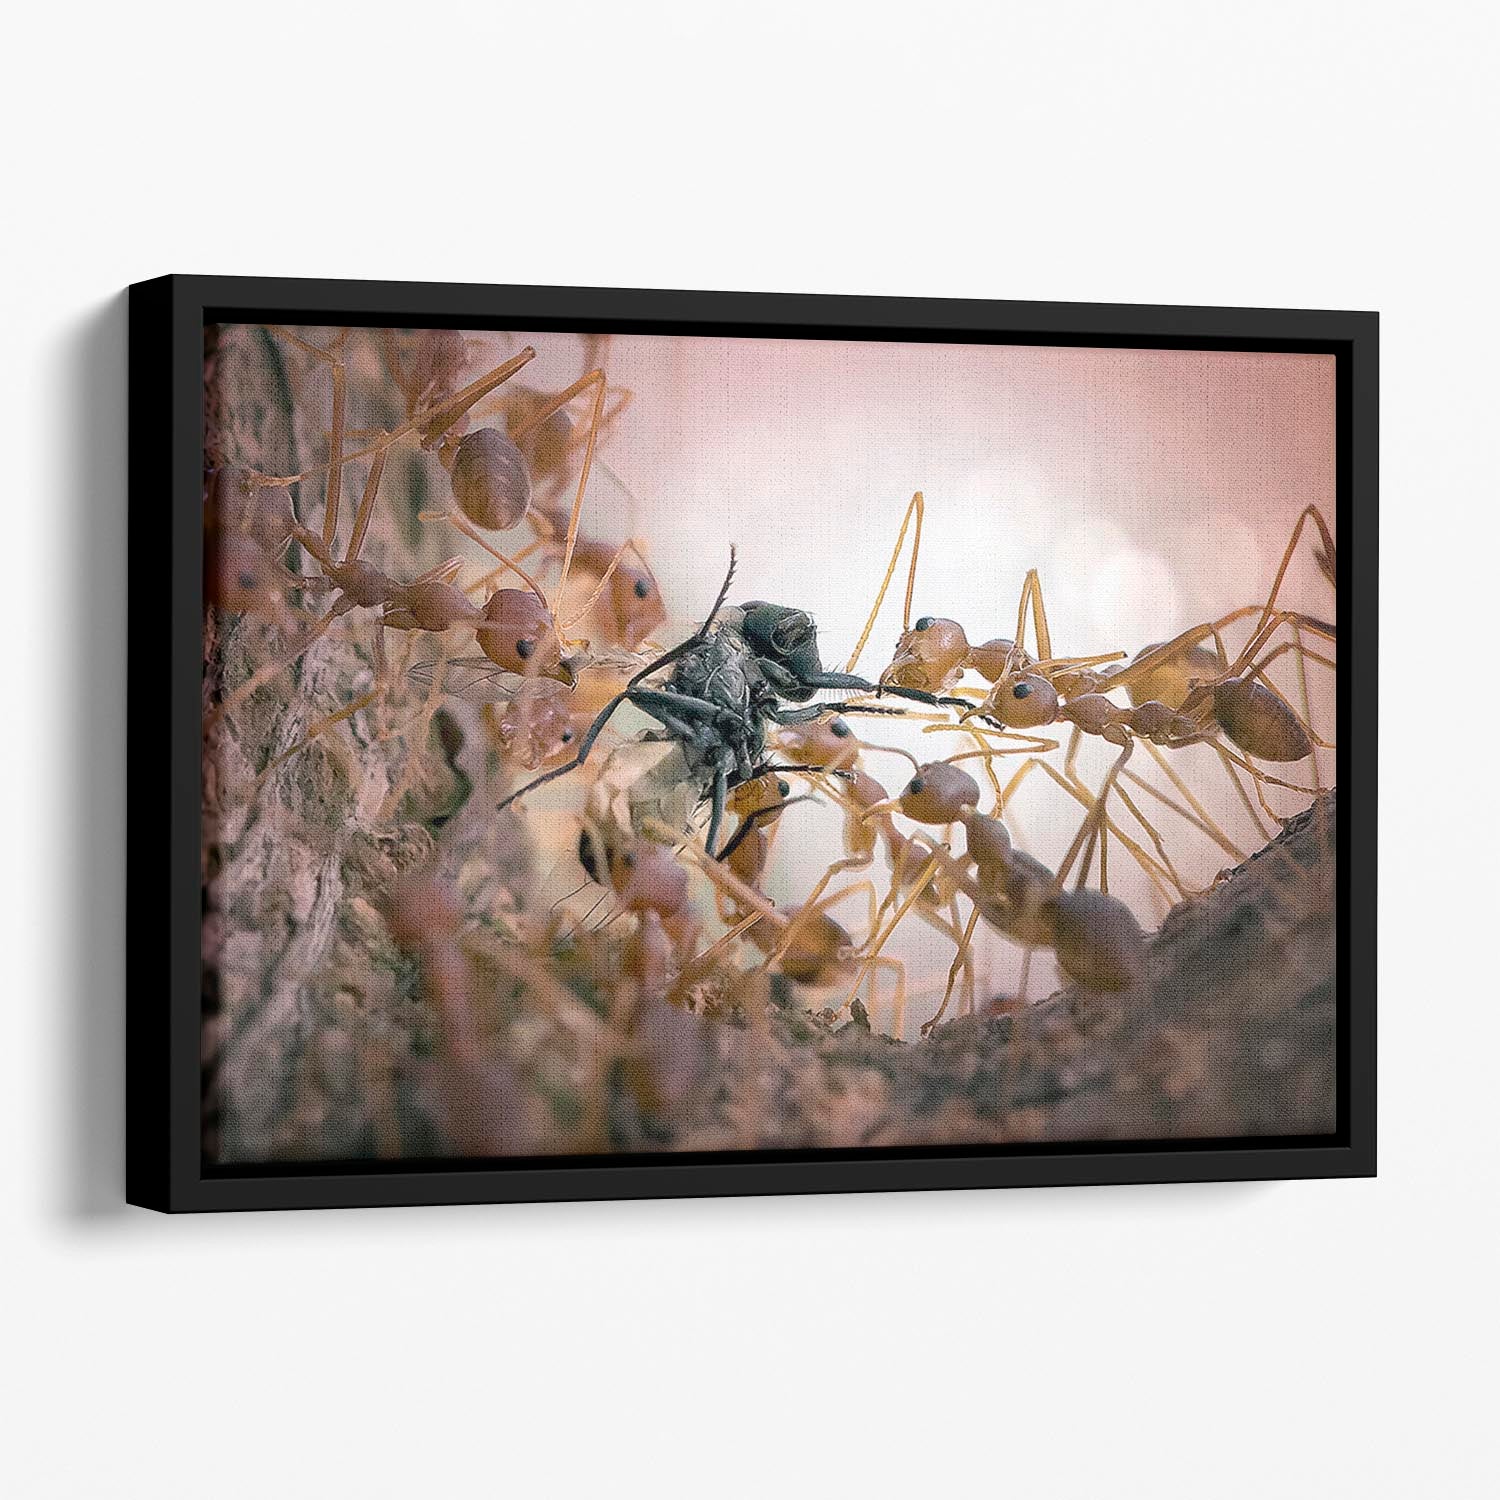 Close p Of Insects Floating Framed Canvas - Canvas Art Rocks - 1